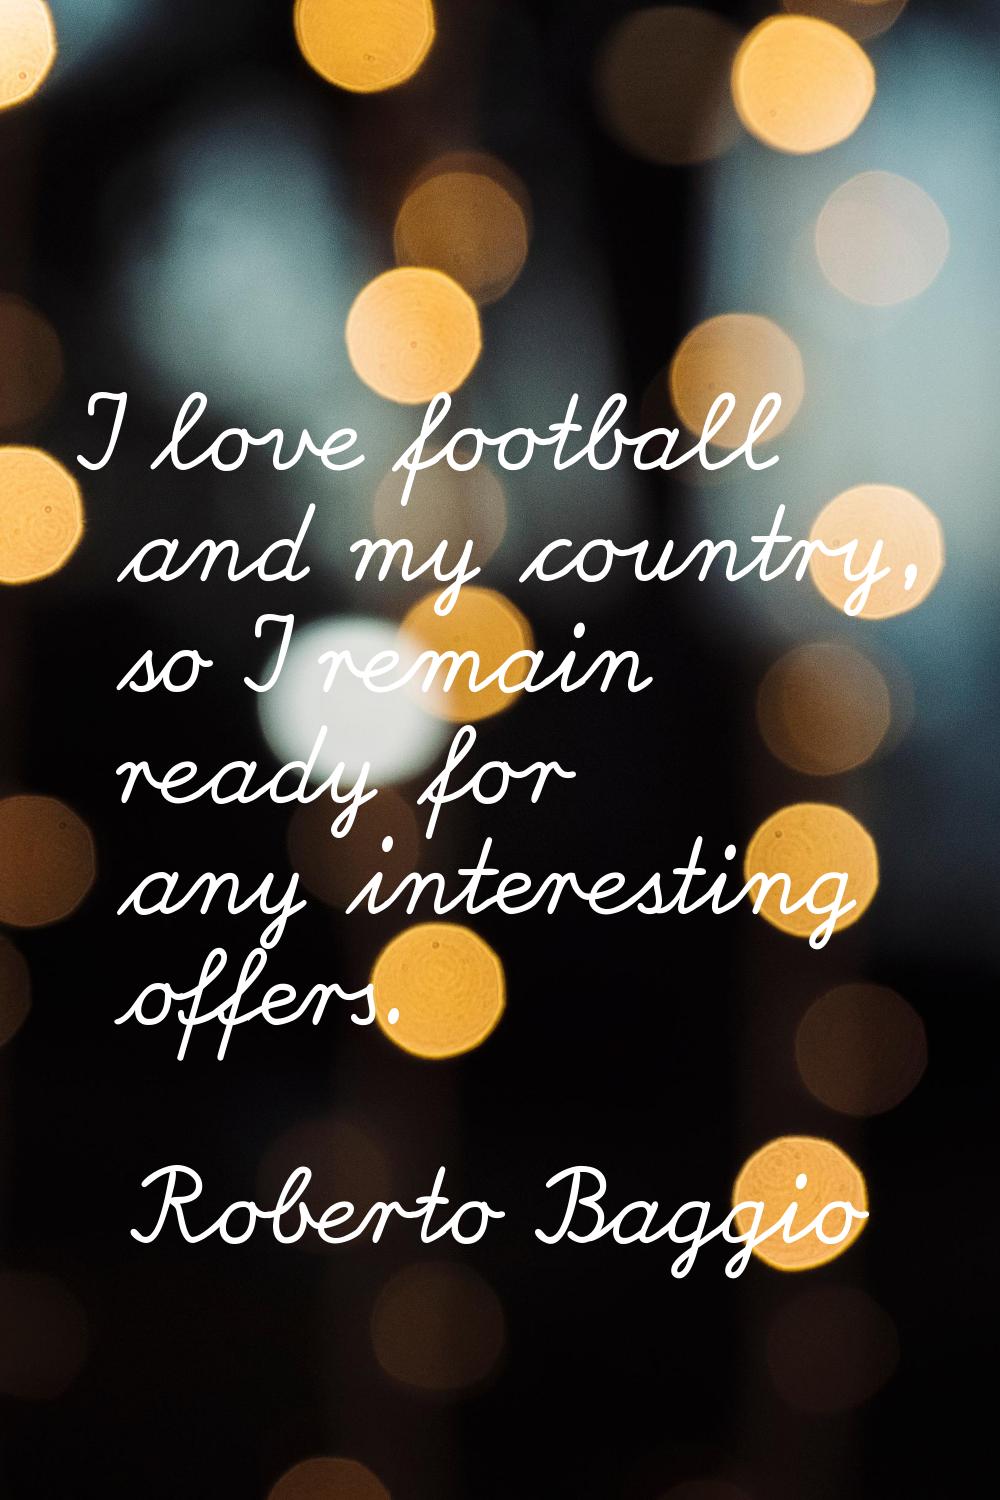 I love football and my country, so I remain ready for any interesting offers.